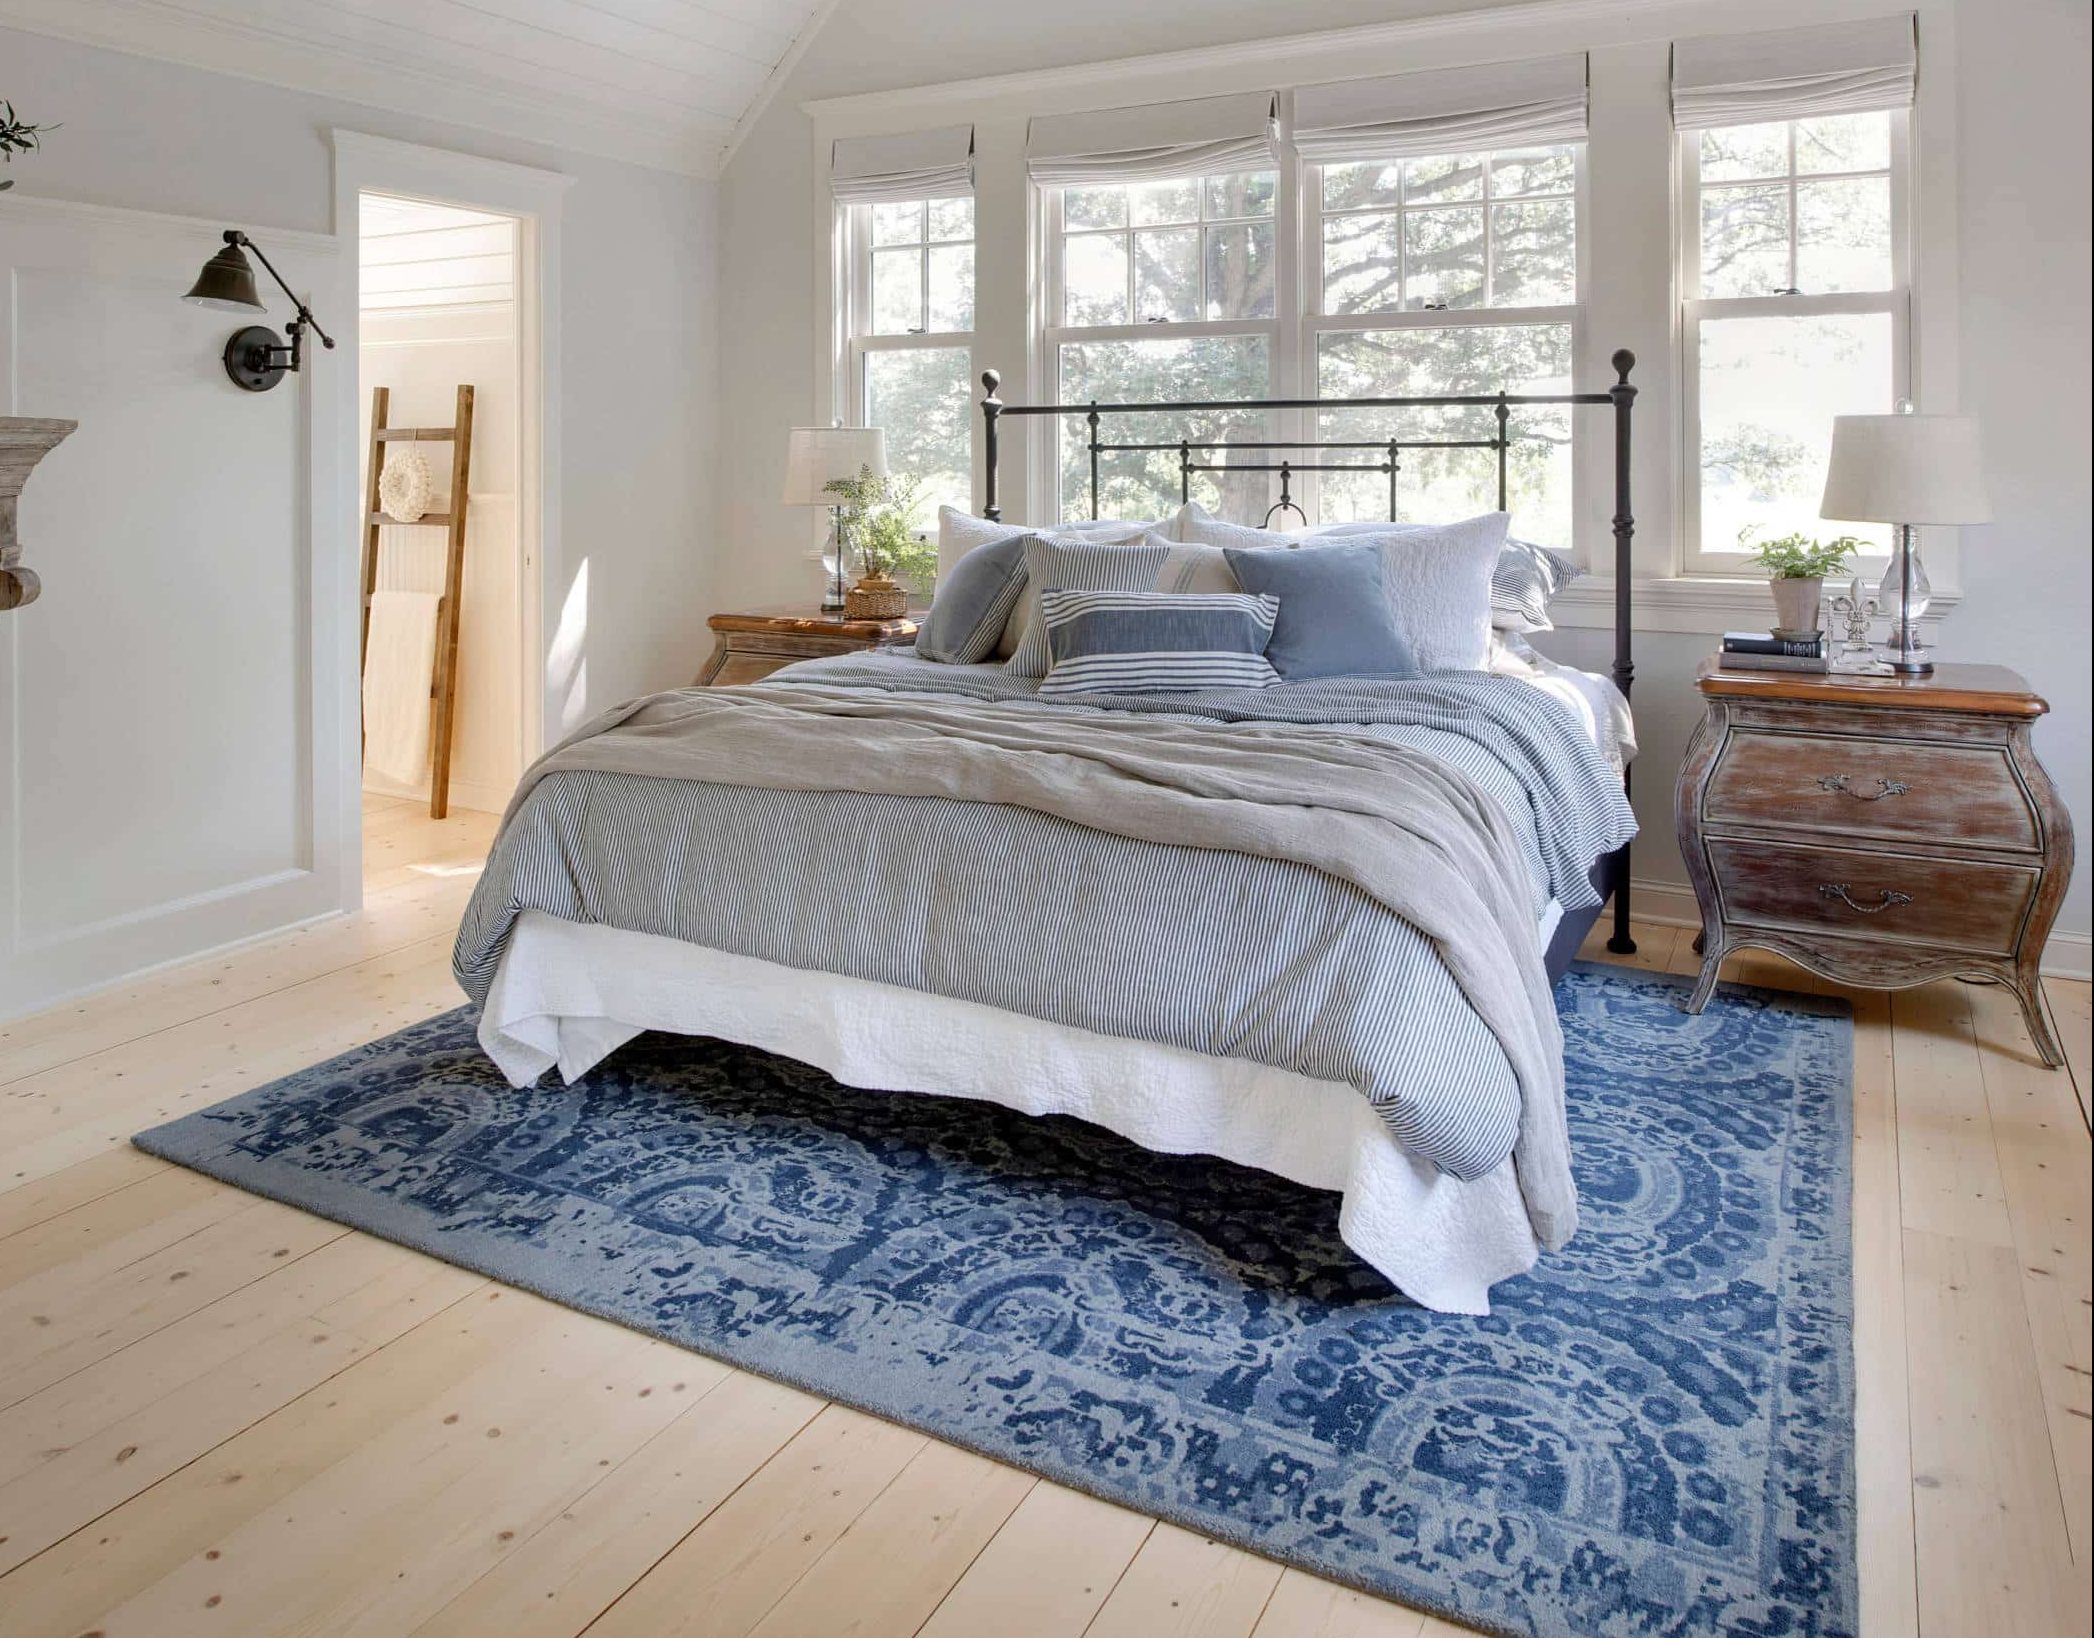 What Size Rug Do You Put Under A King, What Size Rug For Queen Bed In Small Room